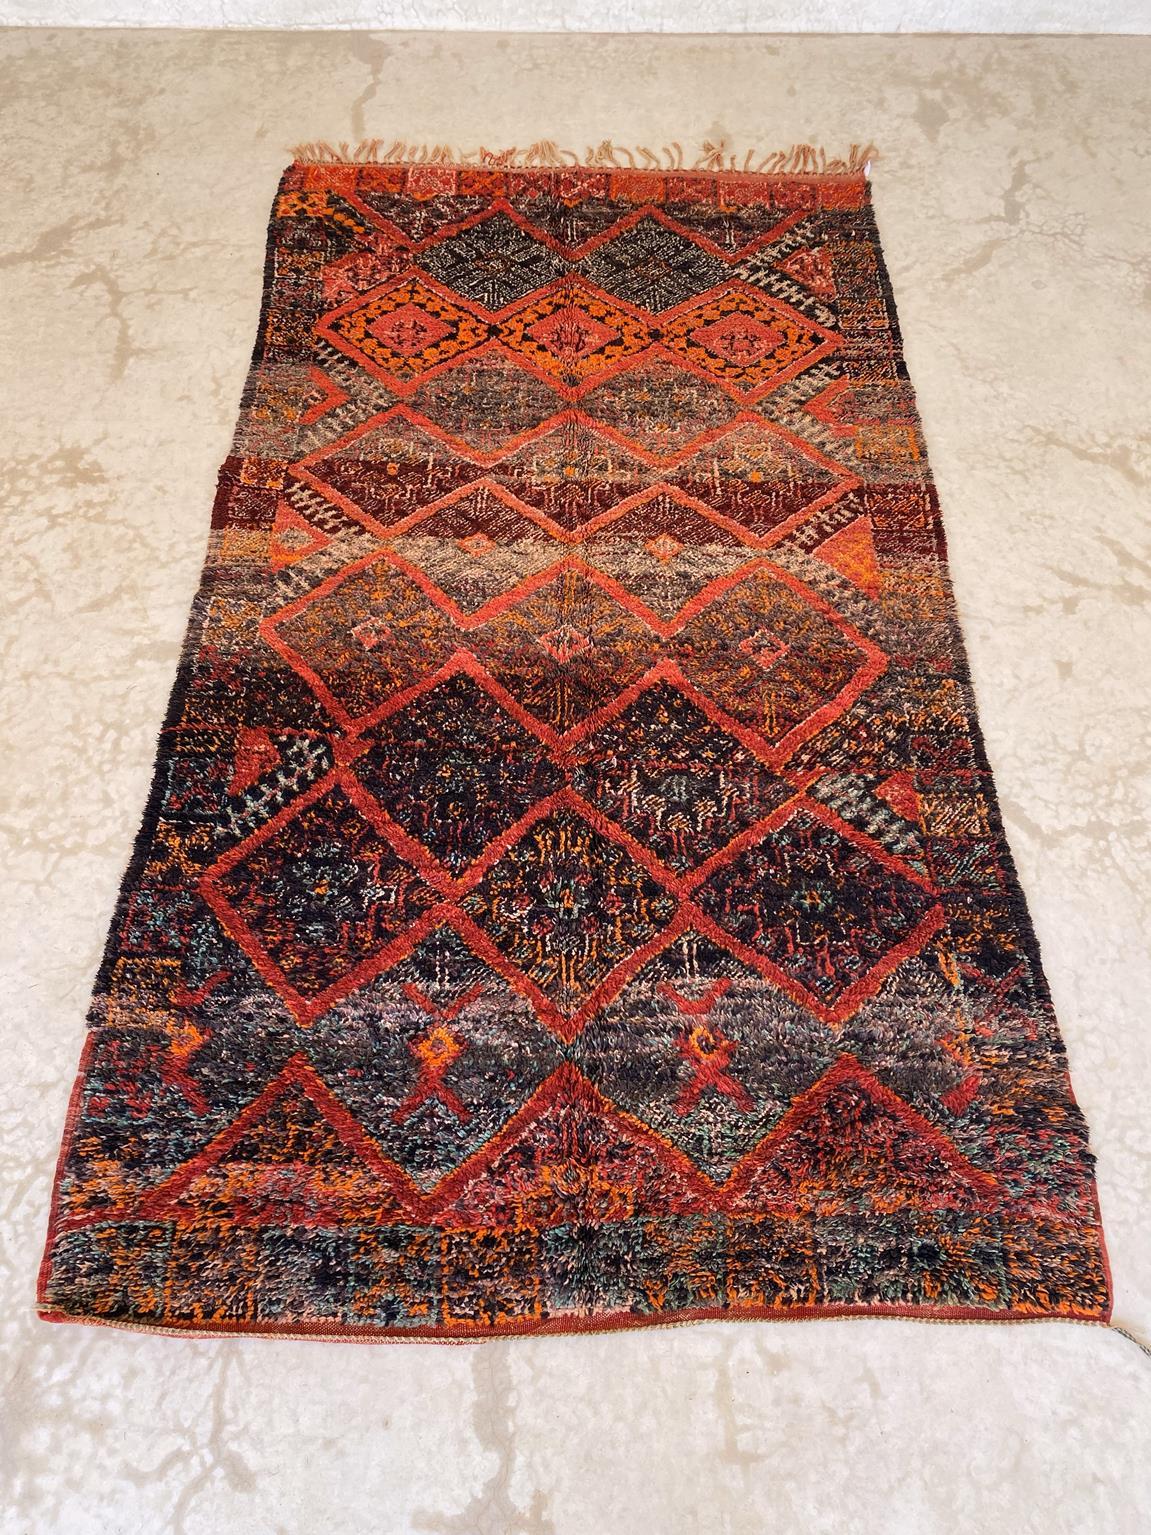 This vintage Beni Mguild rug is a collector! Honestly I have never seen a moroccan rug with such a moody color combo! The perfect rug to bring warmth and character to your space!

The main colors of the rug are black and a warm red but I guess you